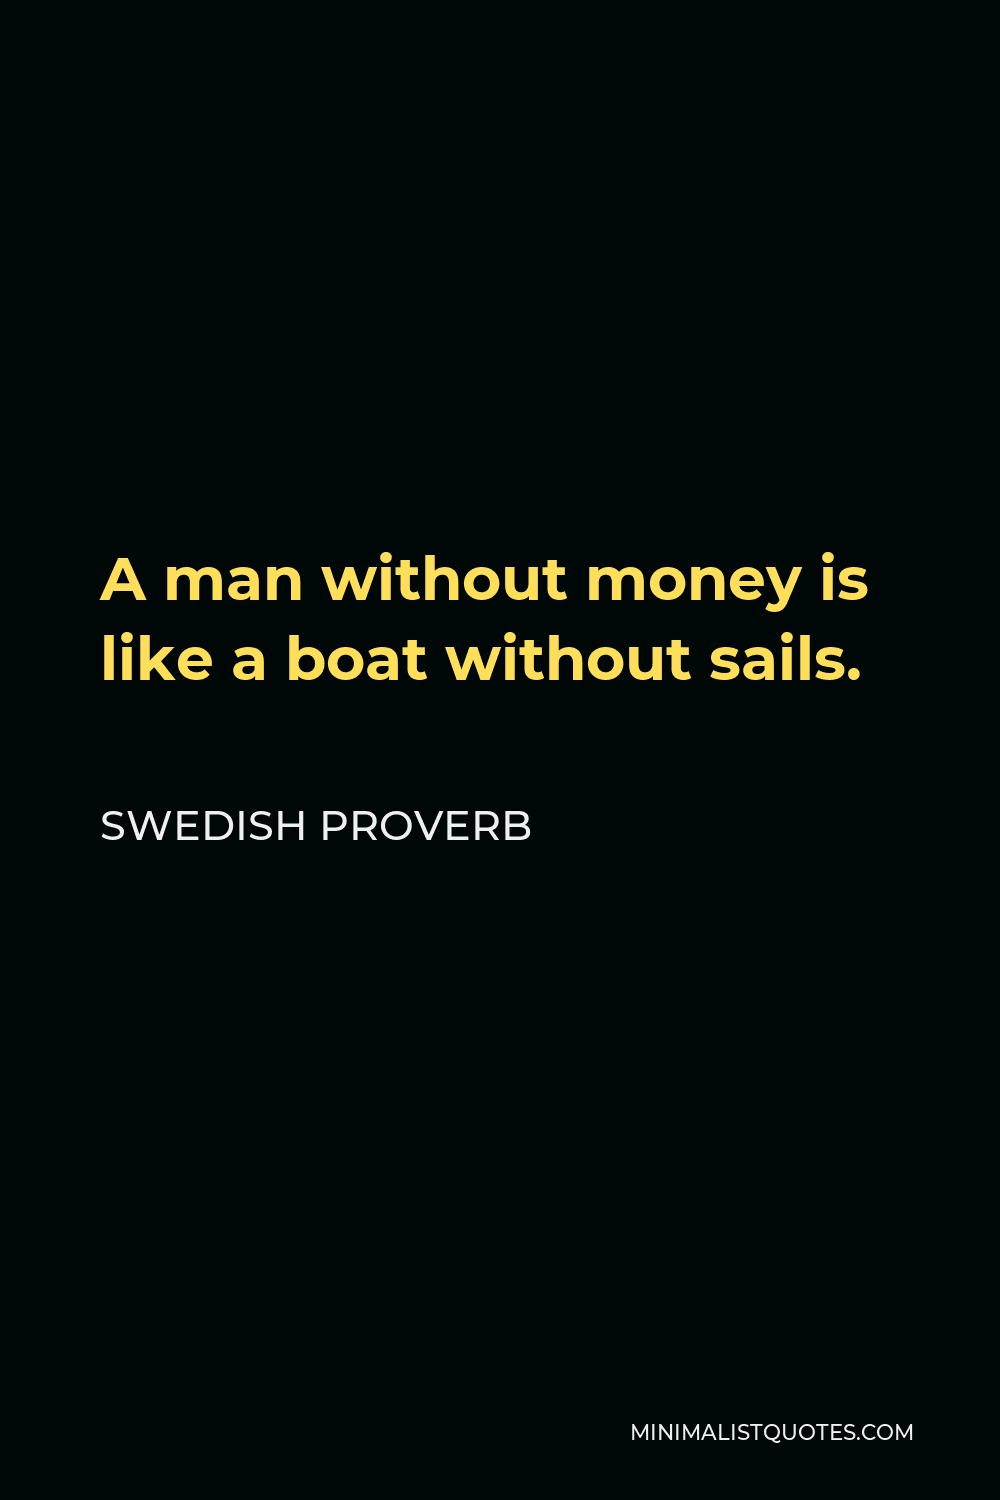 Swedish Proverb Quote - A man without money is like a boat without sails.